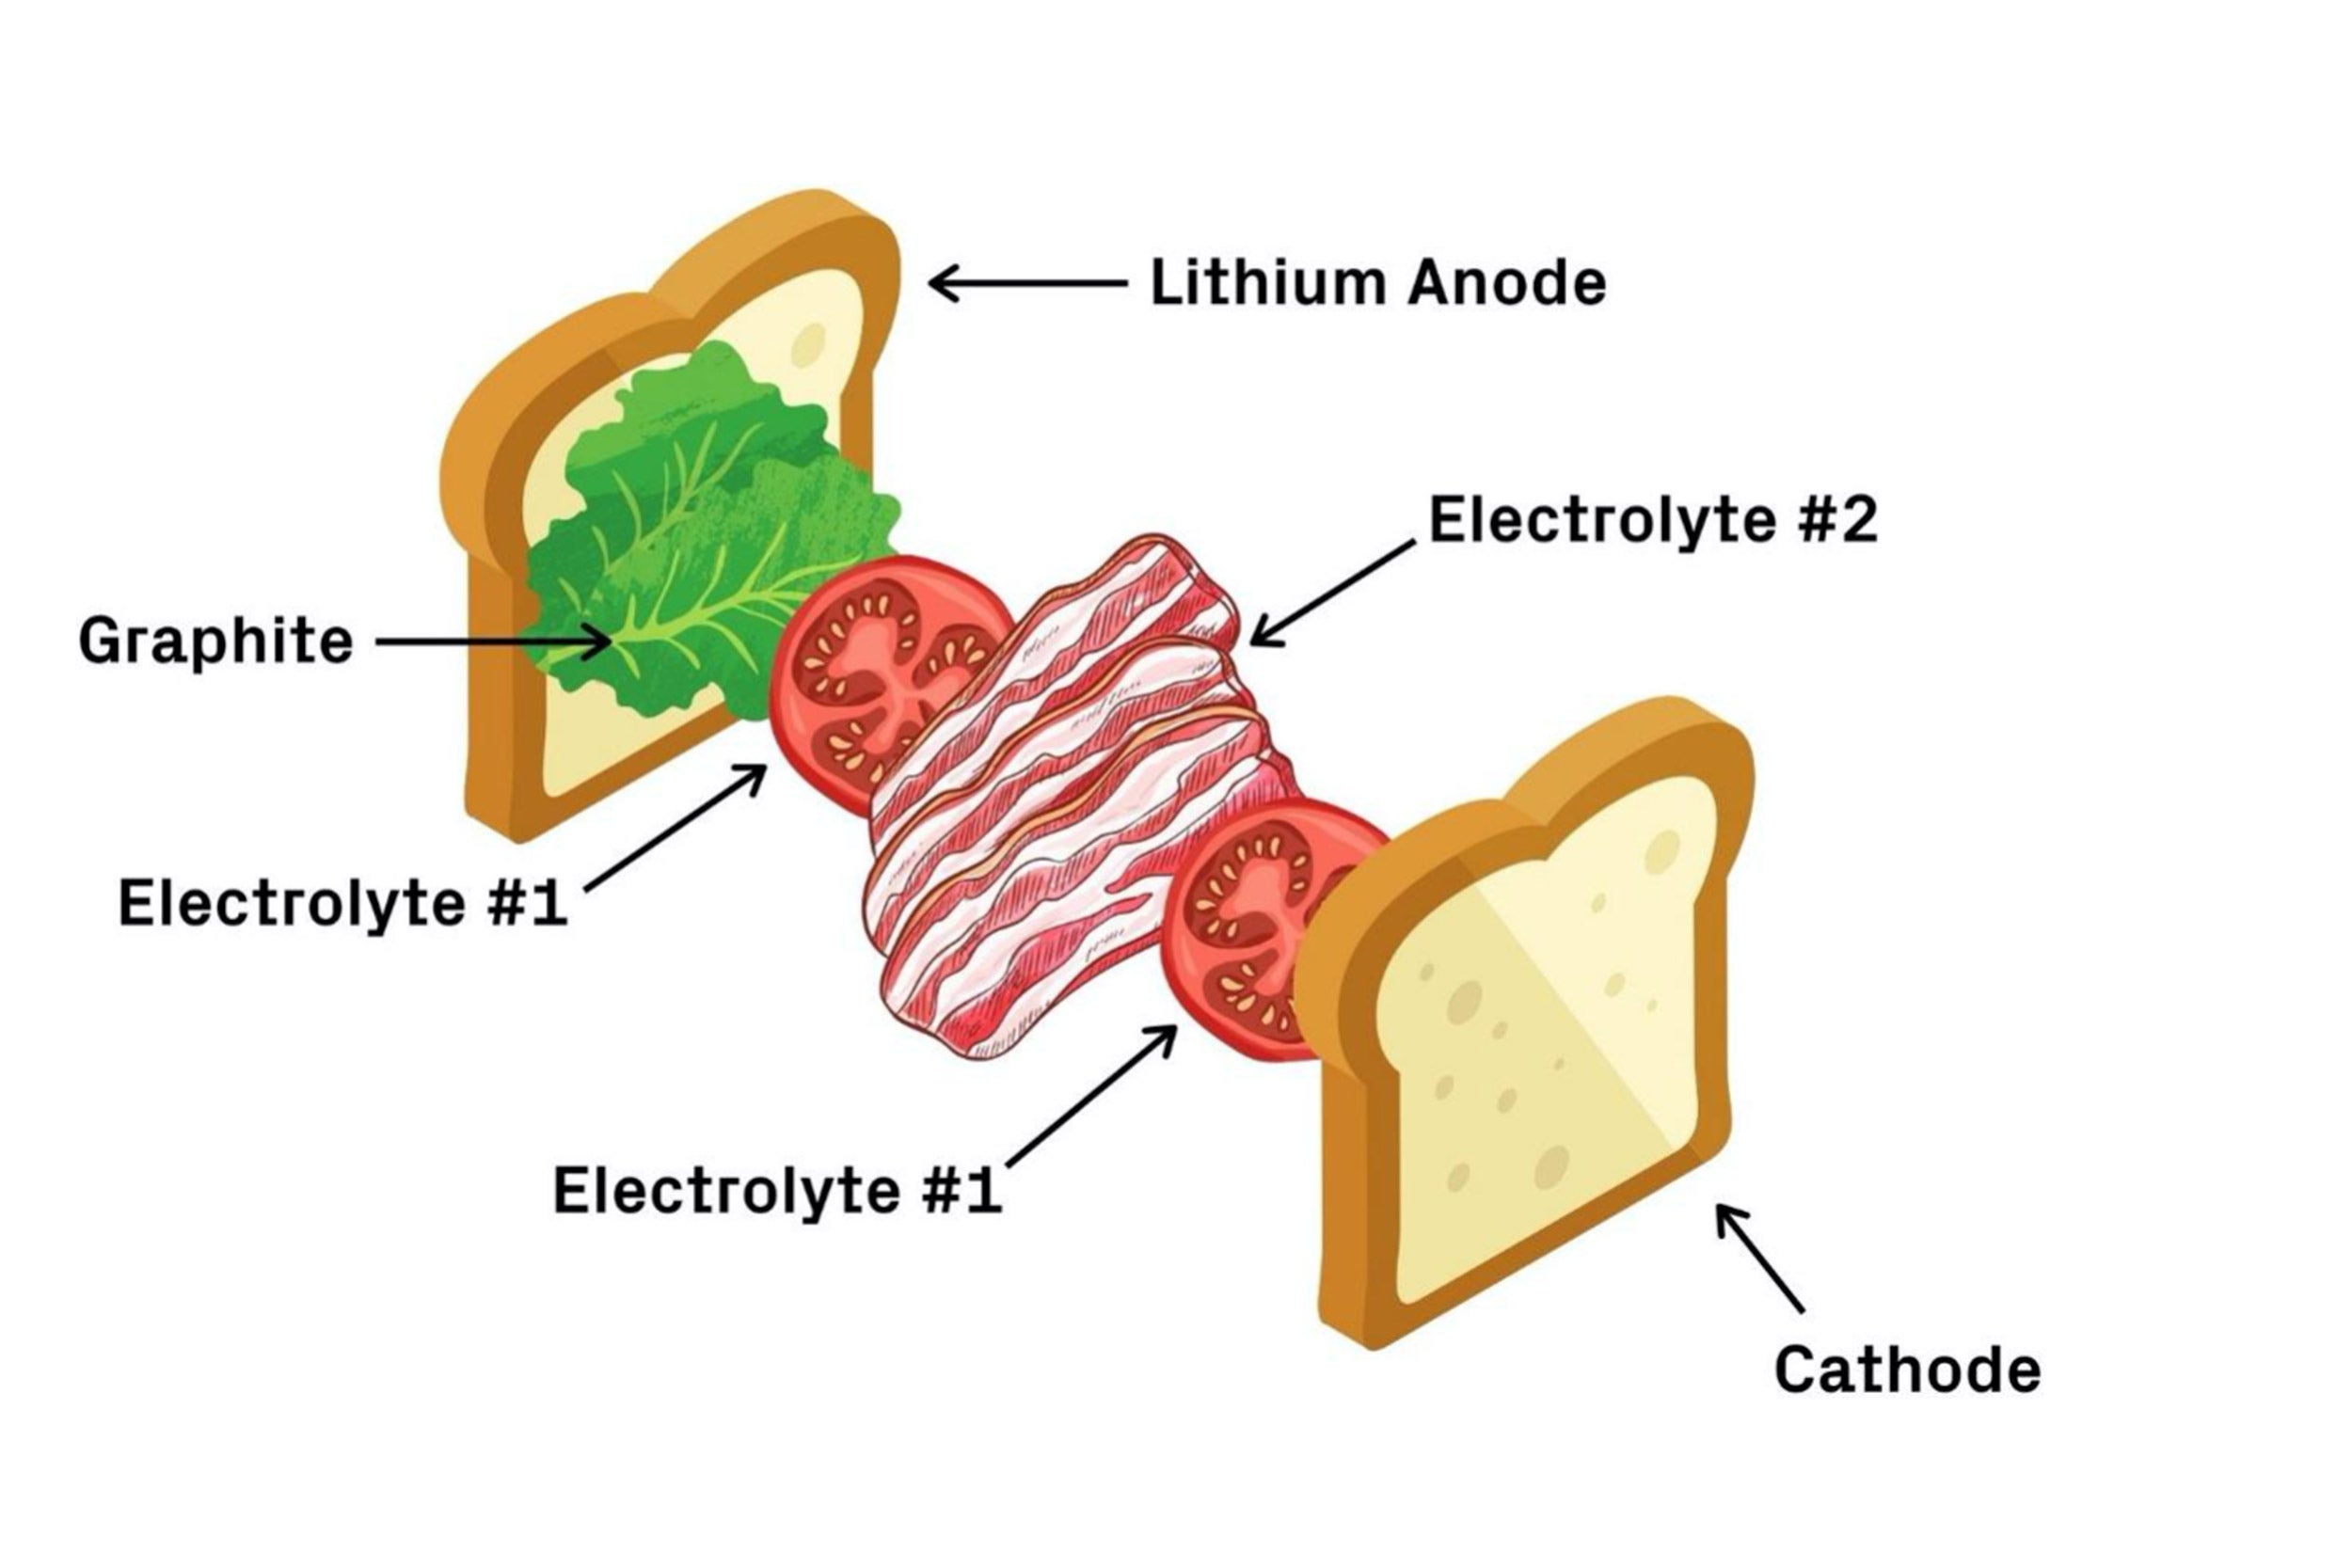 A graphic showing how a new battery is similar to a BLT sandwich.